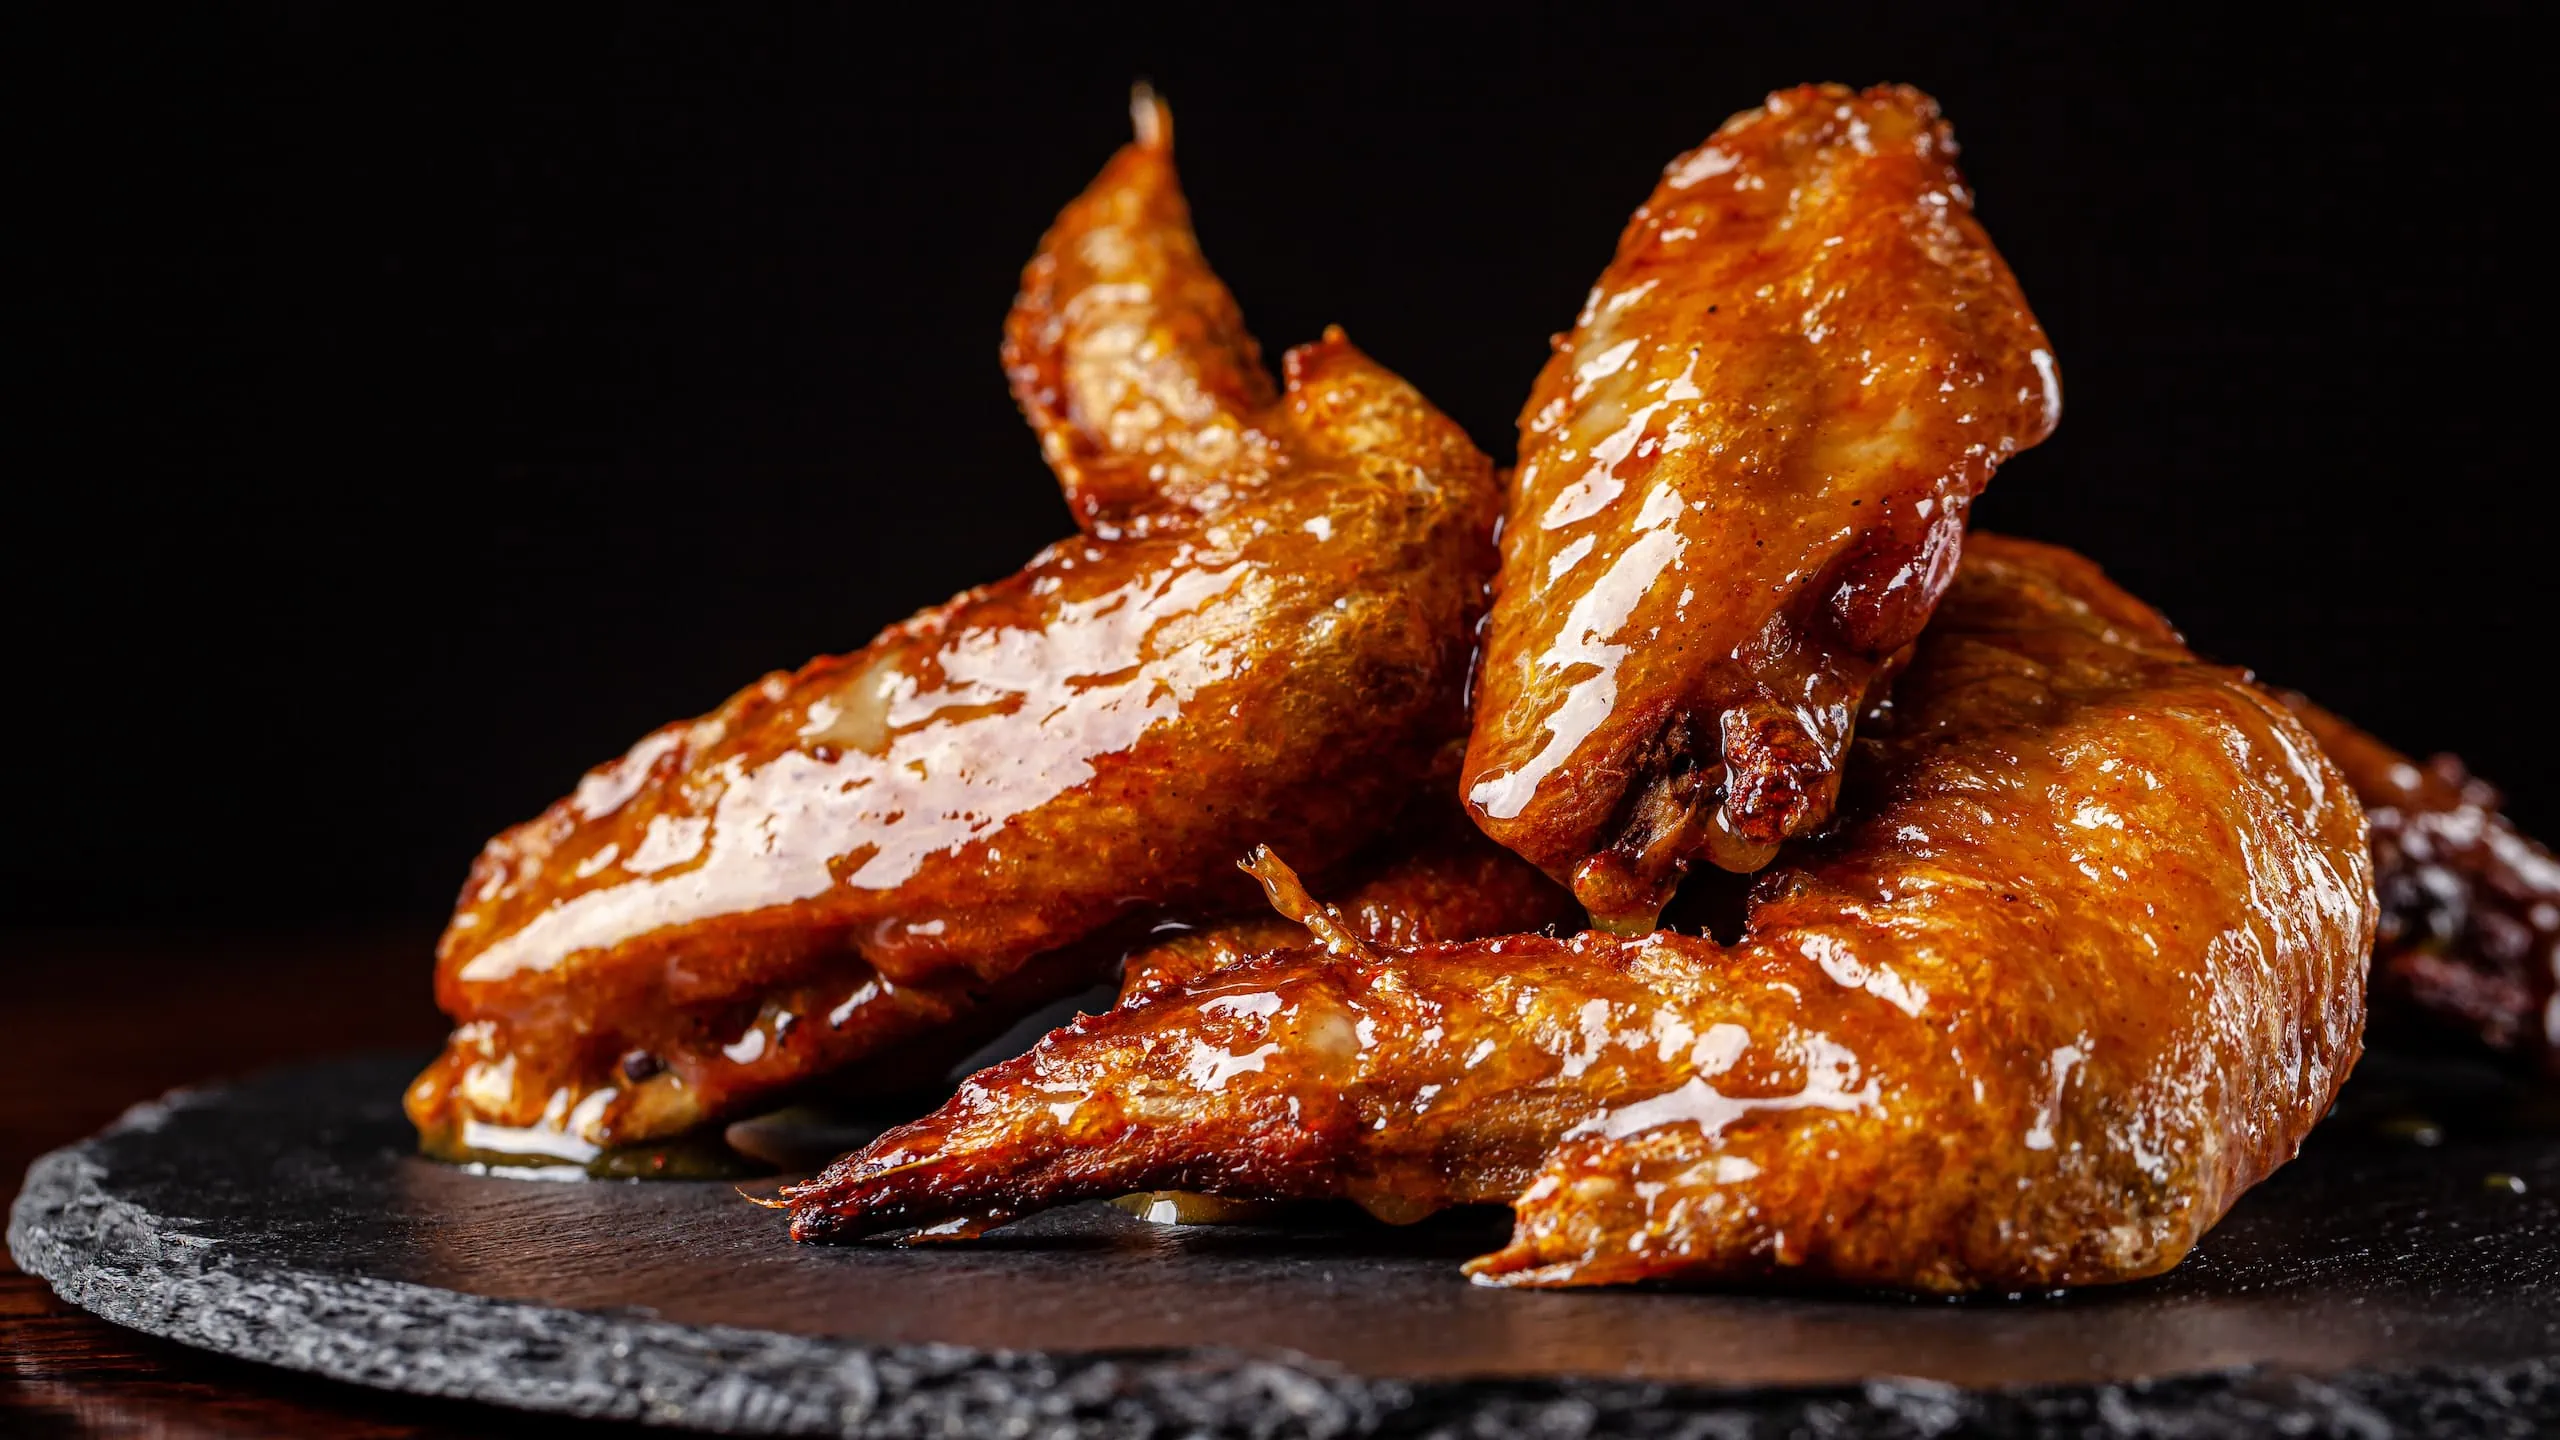 Our heavenly Hennessy wings recipe